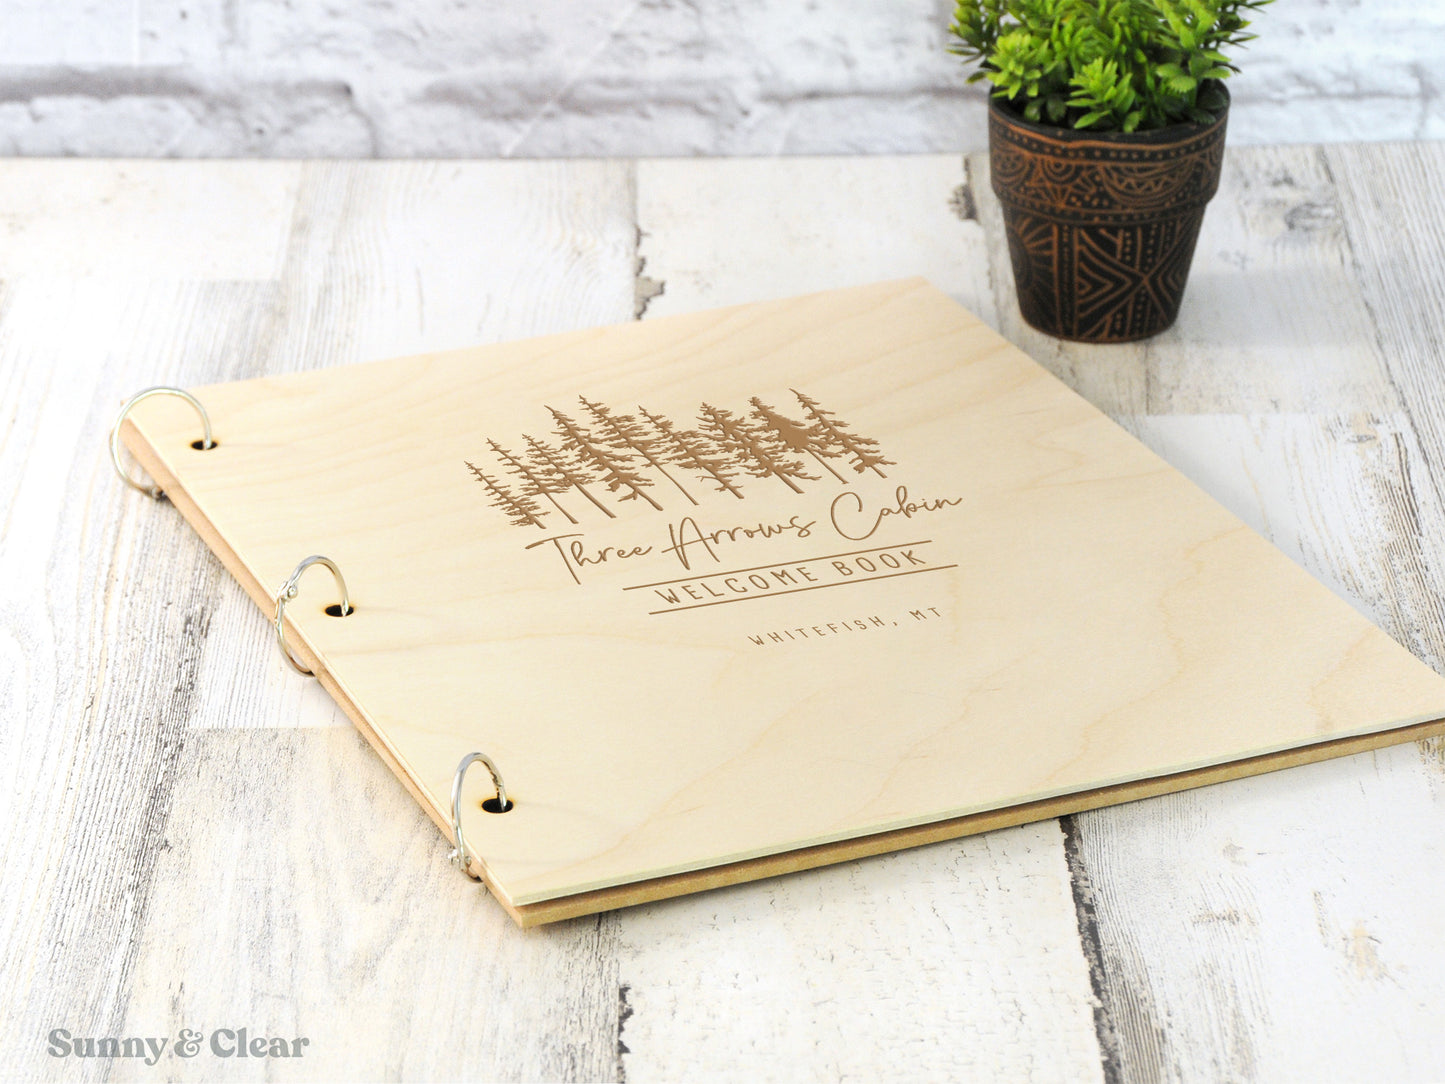 AirBNB Welcome Book Binder, Tree Bunch, Pines Silhouette, Personalized Vacation Home Rental Book